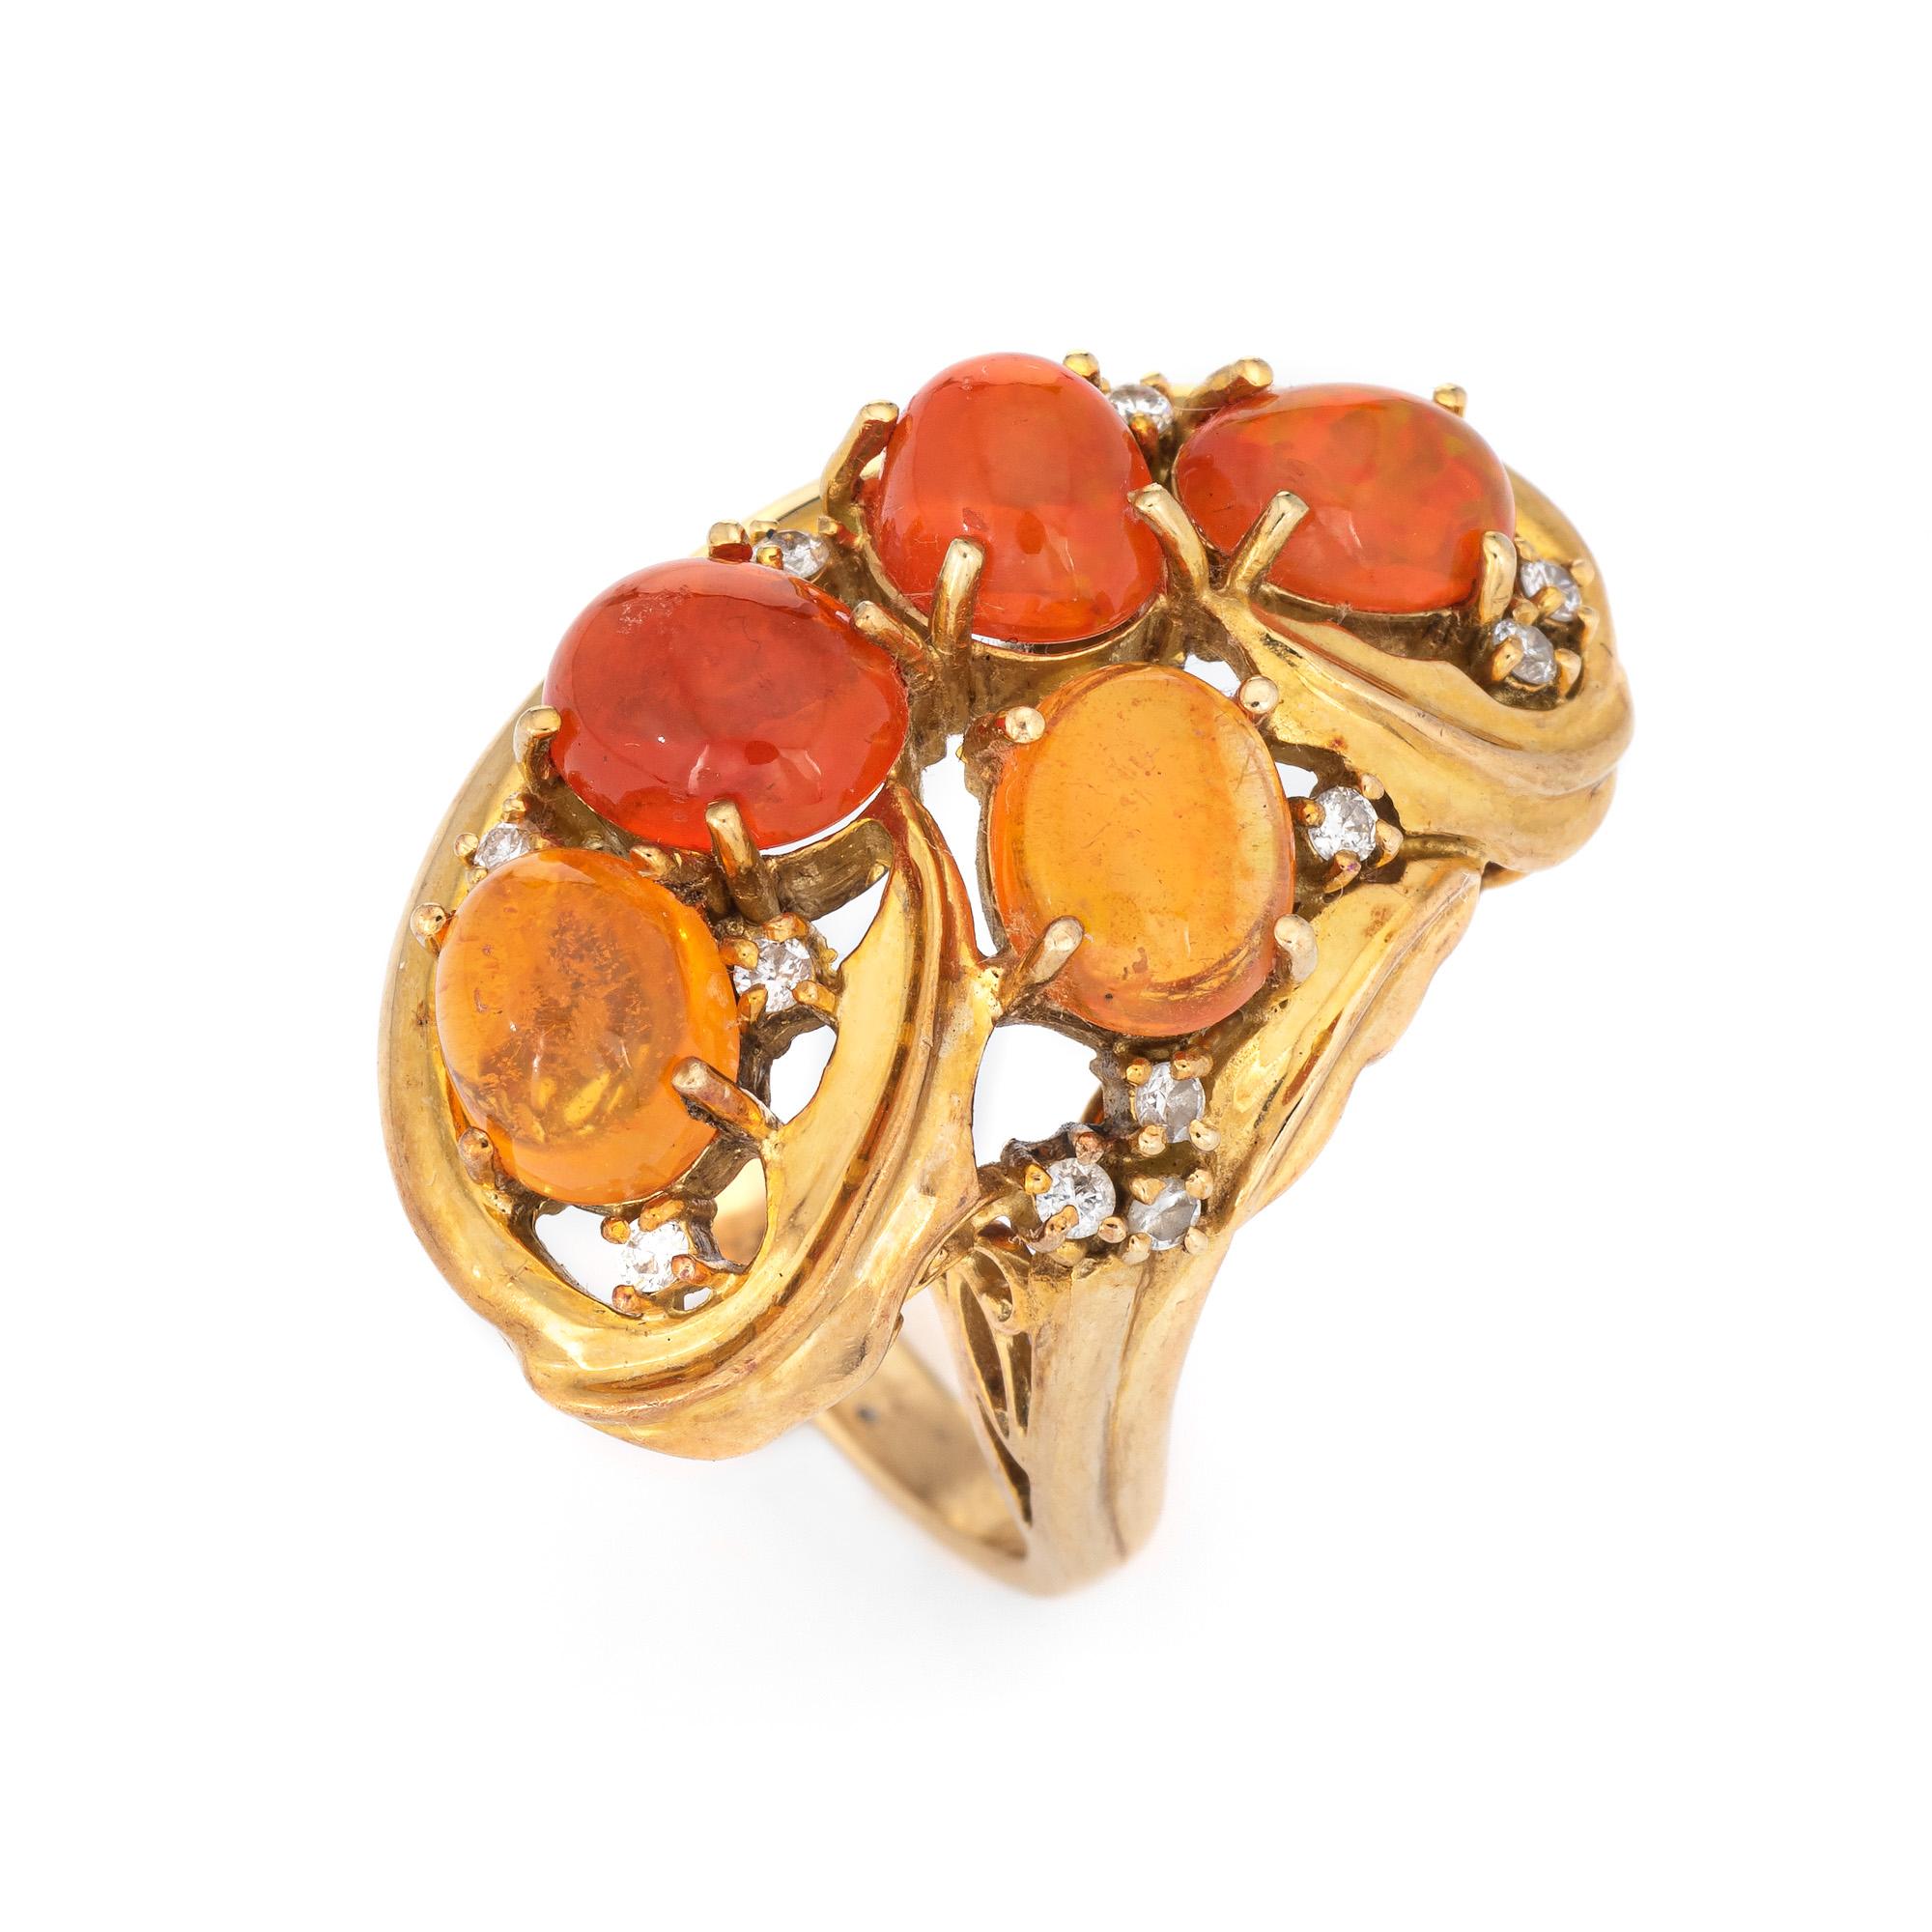 Stylish vintage Mexican fire opal & diamond cocktail ring (circa 1970s) crafted in 18 karat yellow gold. 

Five natural opals range in size from 6mm to 7mm (estimated at 4.68 carats) is accented with eight round brilliant cut diamonds totaling an